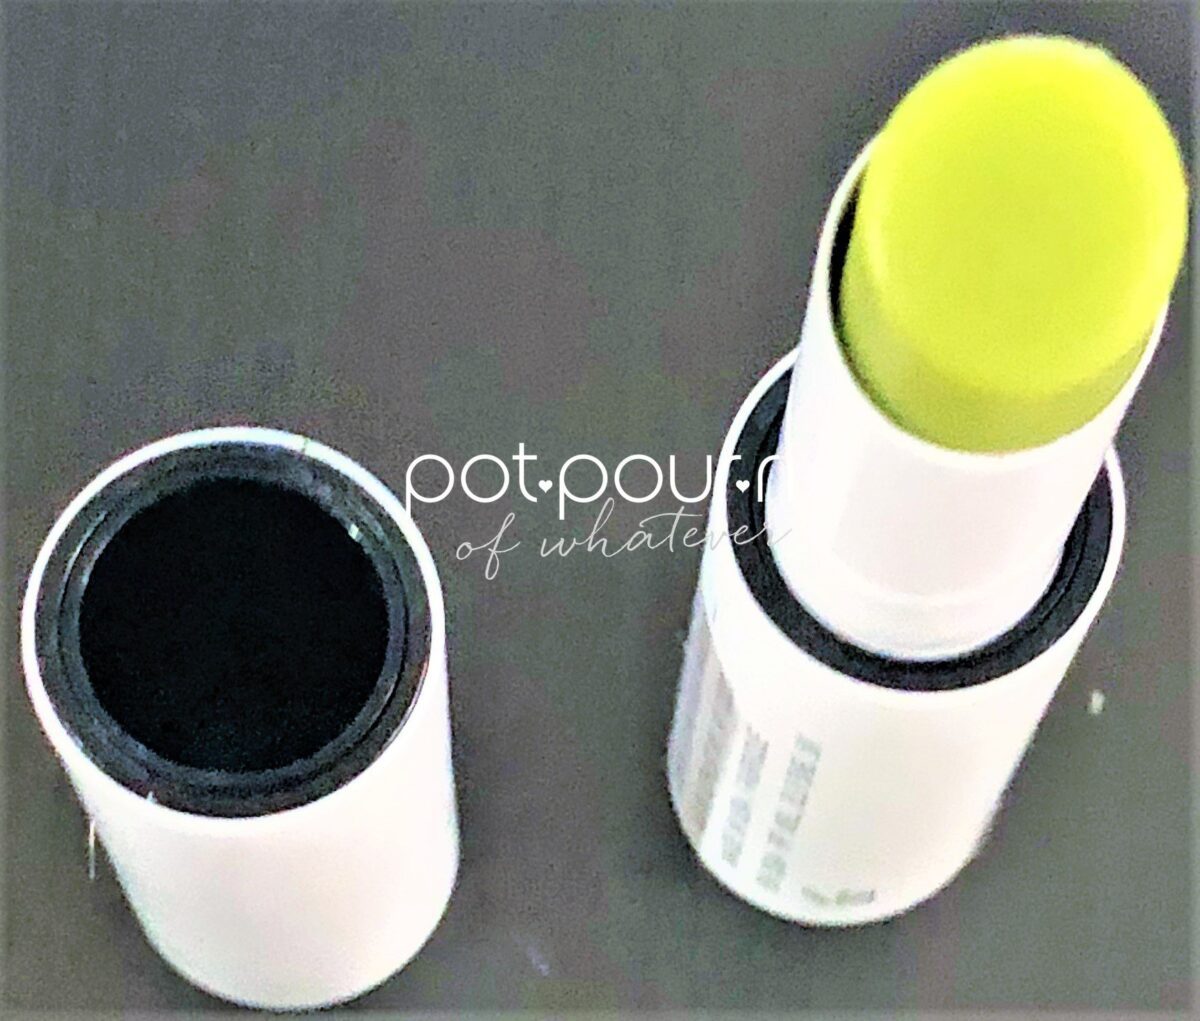 THE BLACK CIRCLE, AND THE BLACK INSIDE THE LID ARE THE MAGNETS FOR MILK MAKEUP KUSH LIP BALM MAGNETIC CLOSURE